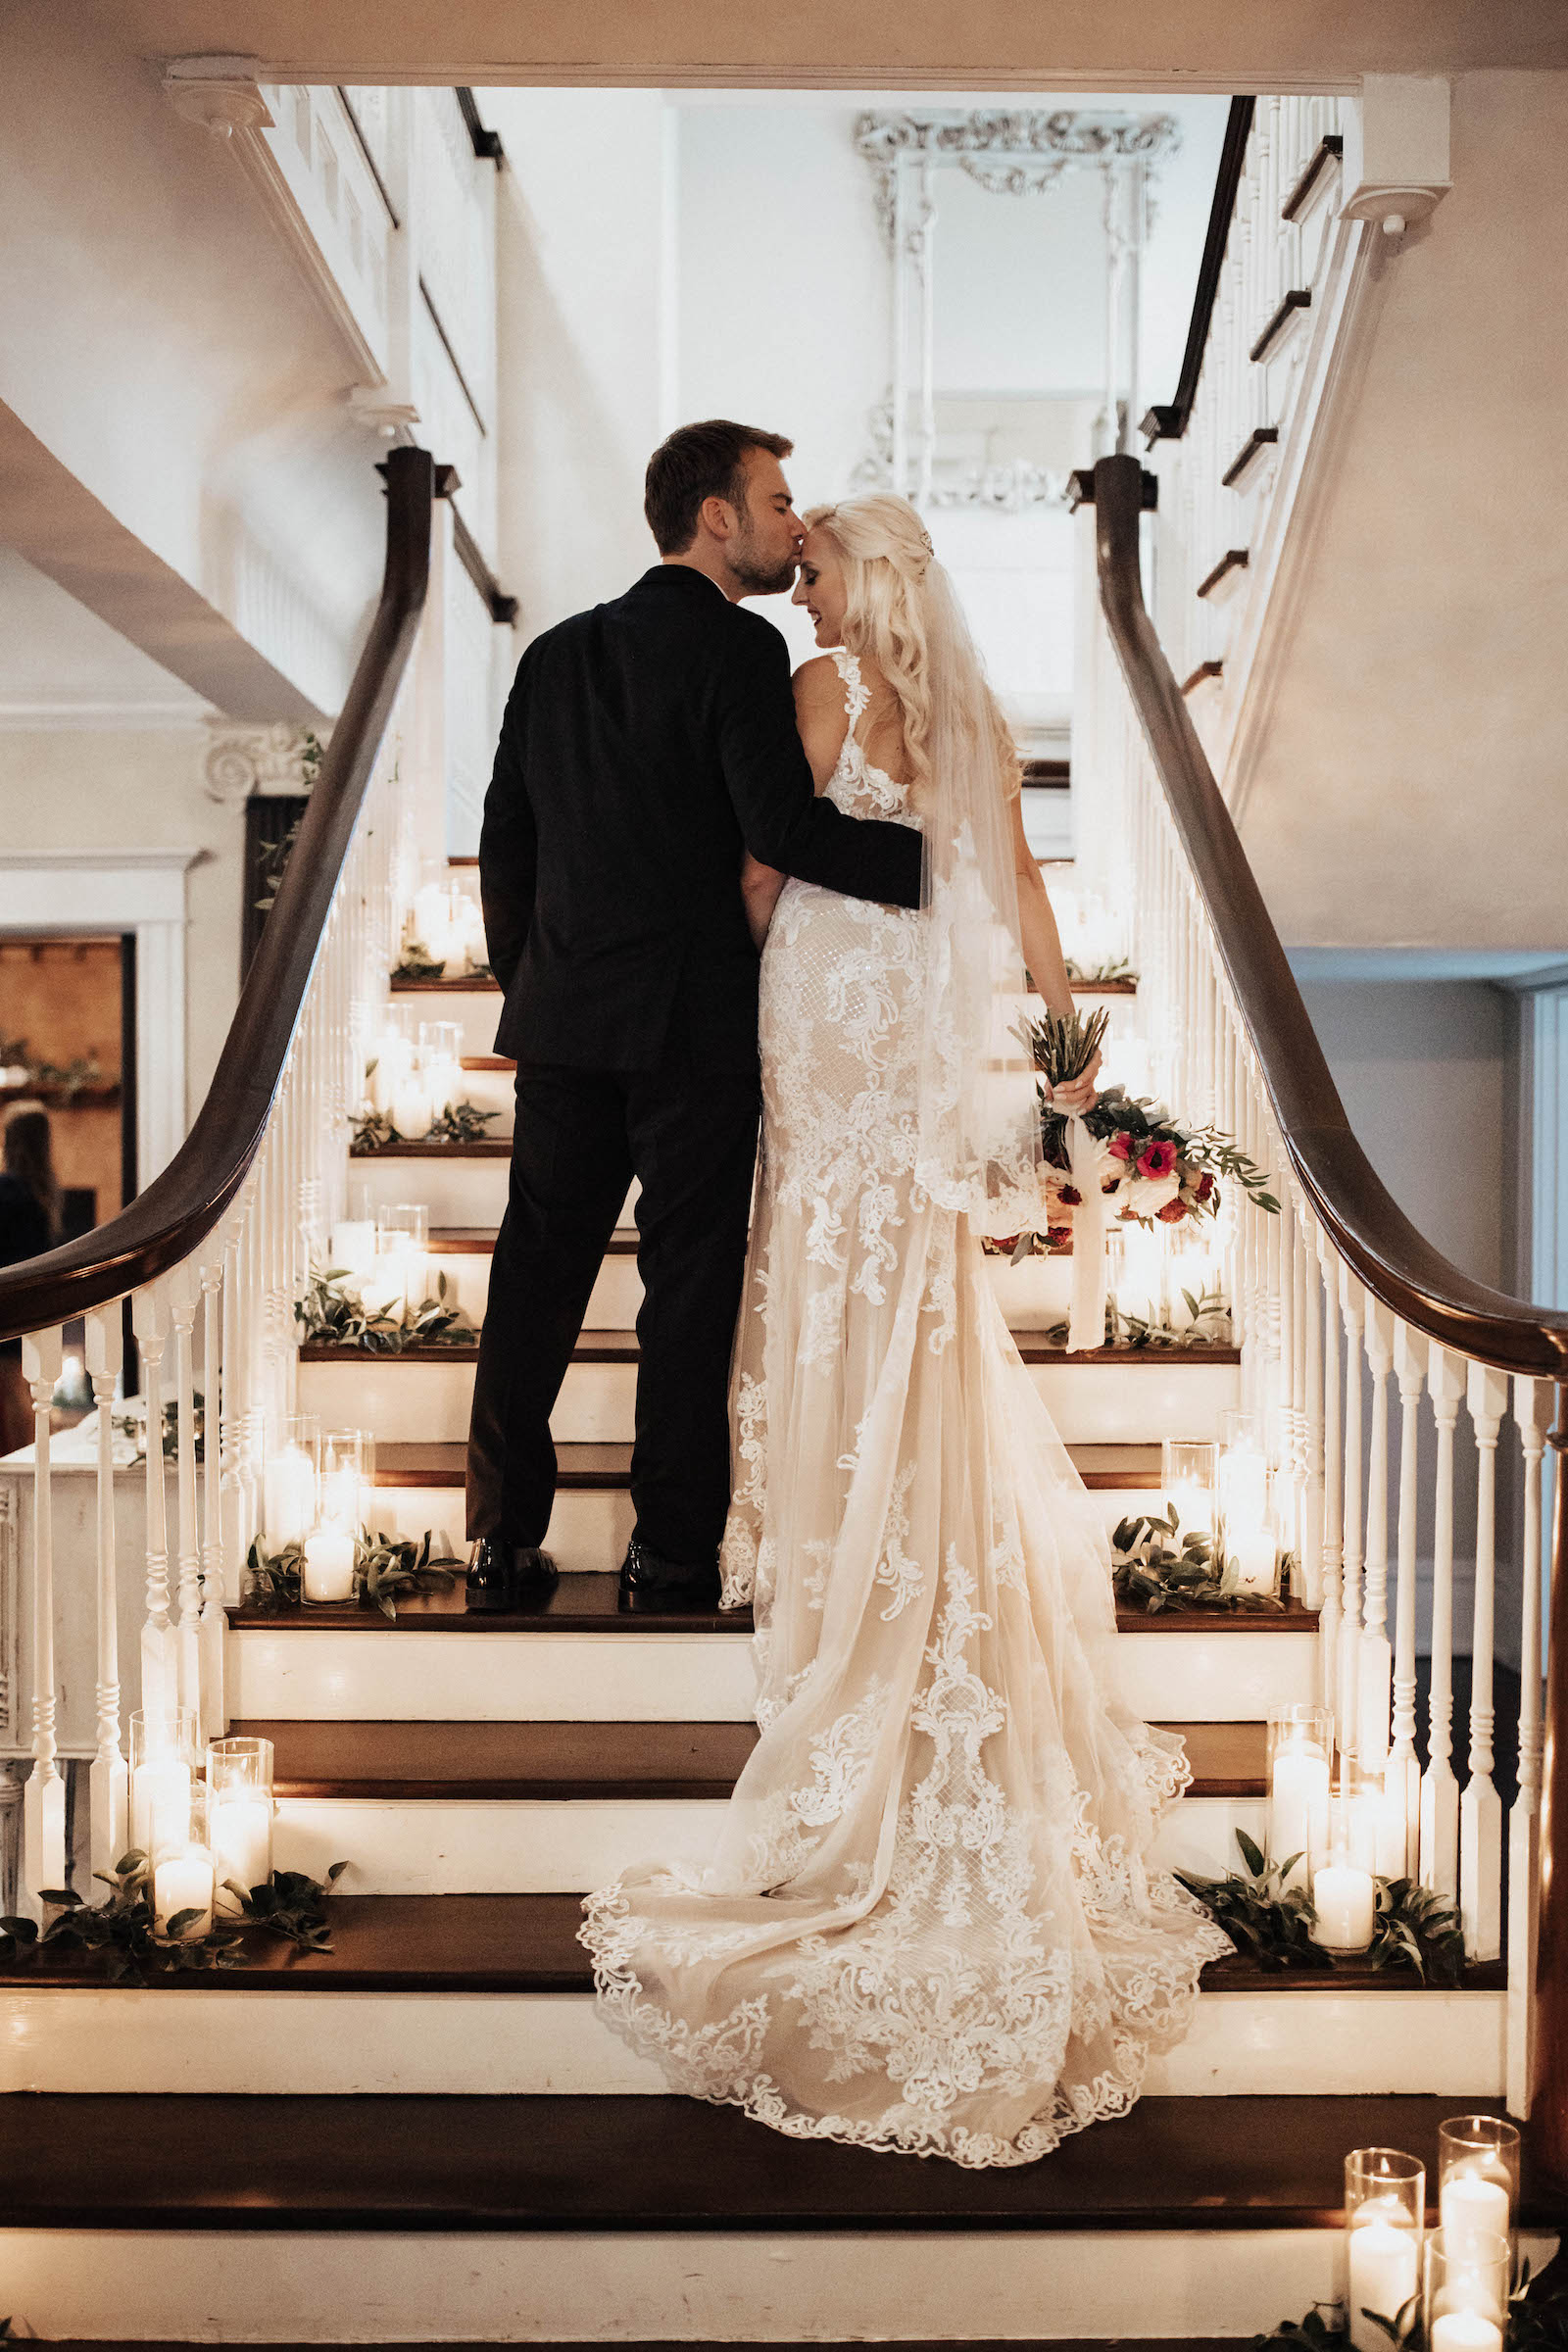 Warm Neutral Wedding, Bride and Groom Walking Up Staircase Lined with Candles | Tampa Bay Wedding Planner Coastal Coordinating | Wedding Venue The Orlo